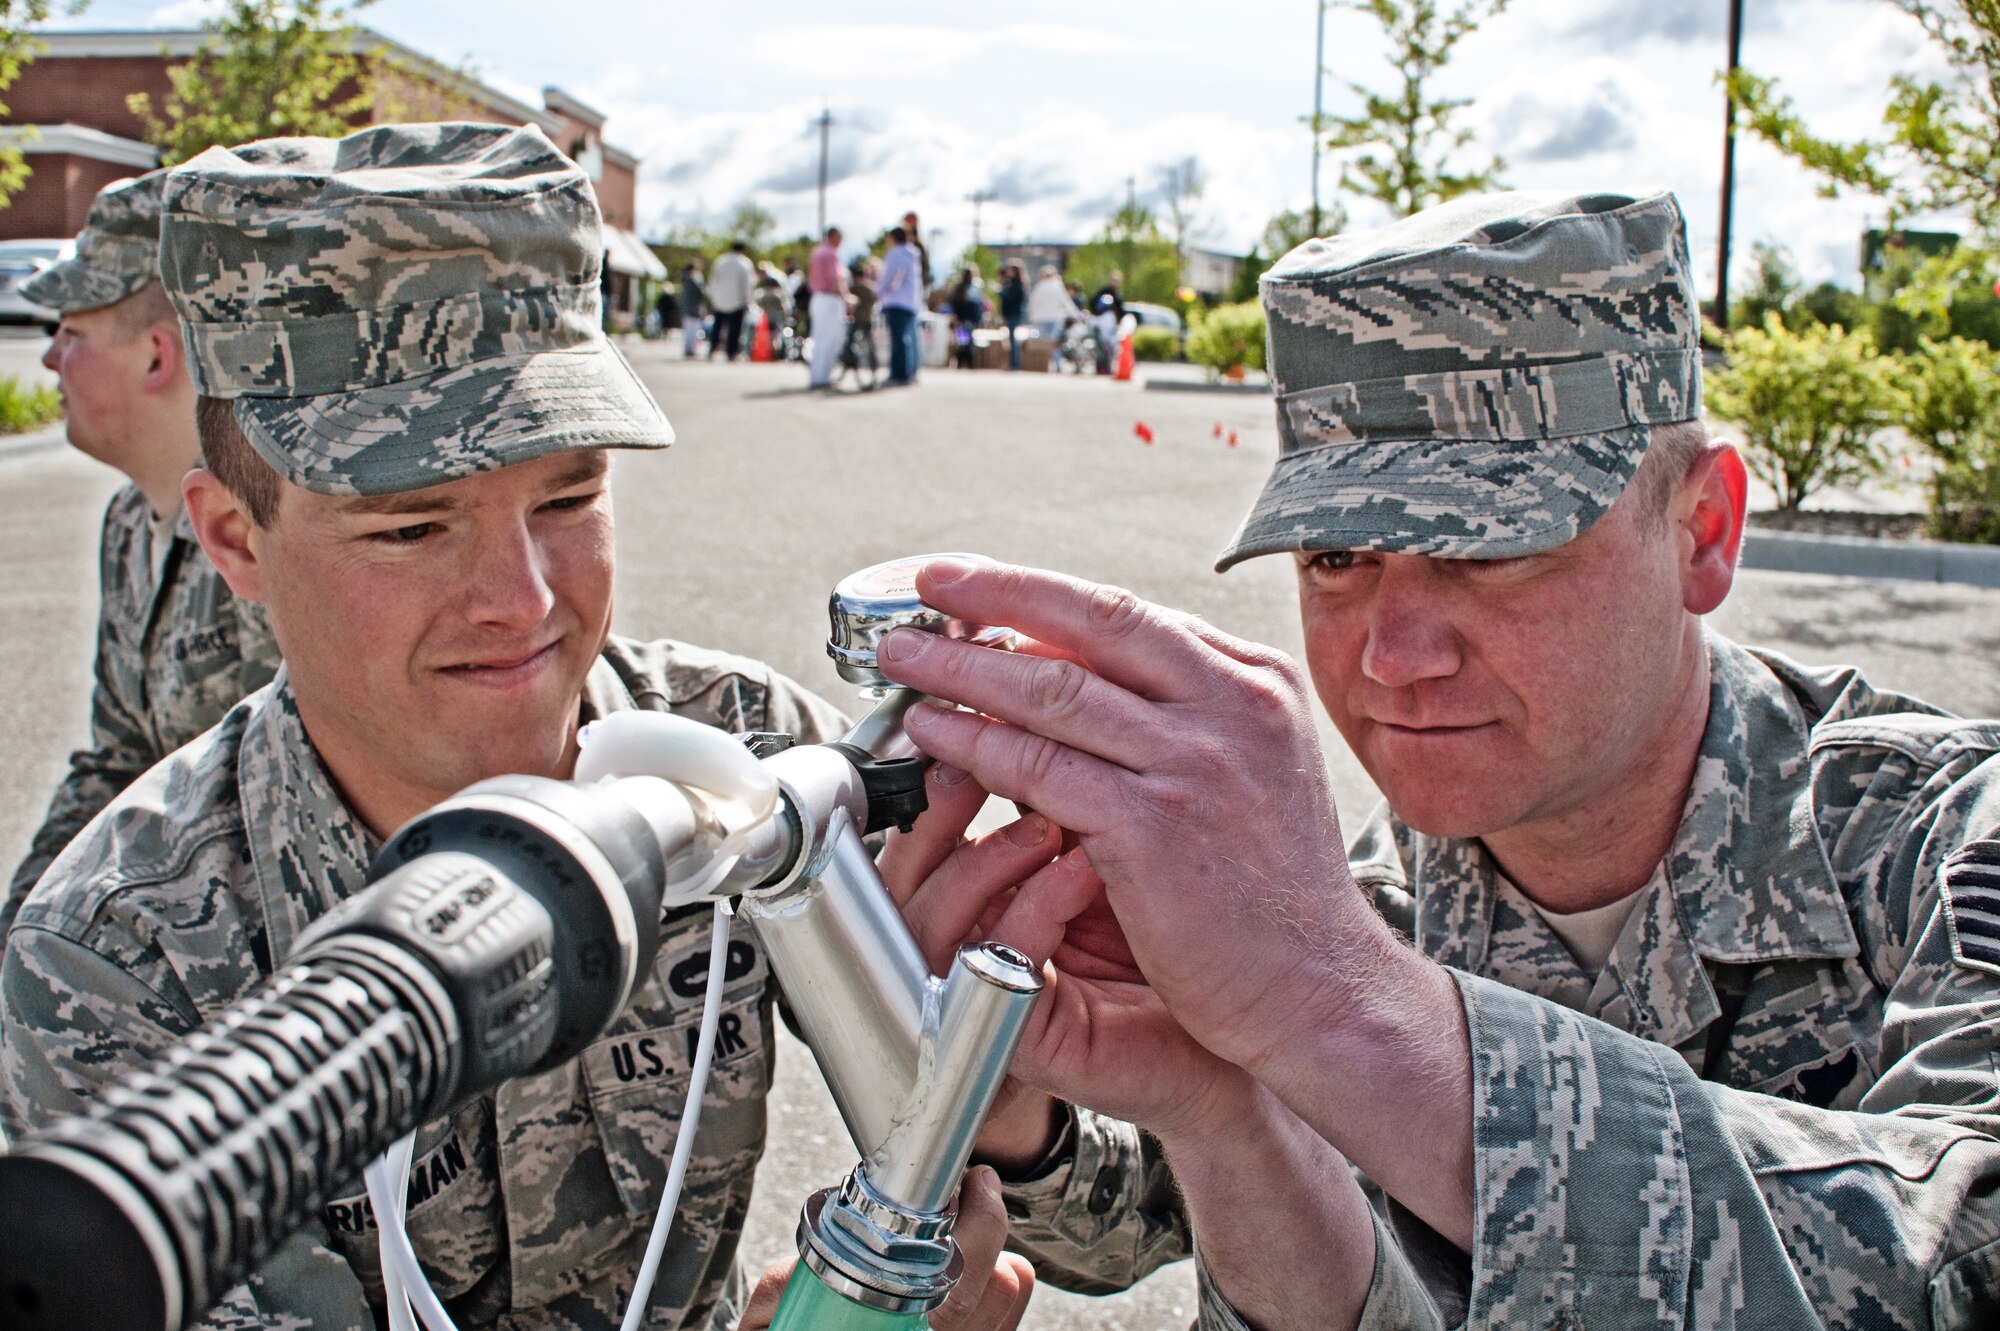 Senior Airman Christopher Christman and Tech. Sgt. Jason Fontaine, vehicle maintainers from the 124th Logistics Readiness Squadron, install a safety bell on a new bike as part of Burgers for Bikes, Bikes for Kids May 5 at Applebee's Restaurant on Vista Avenue in Boise. For 20 years, Idaho Air National Guard volunteers have transported and provided on-site repairs and adjustments to more than 5,250 bikes for deserving youth who are nominated through local schools. (Air Force photo by Tech. Sgt. Becky Vanshur)